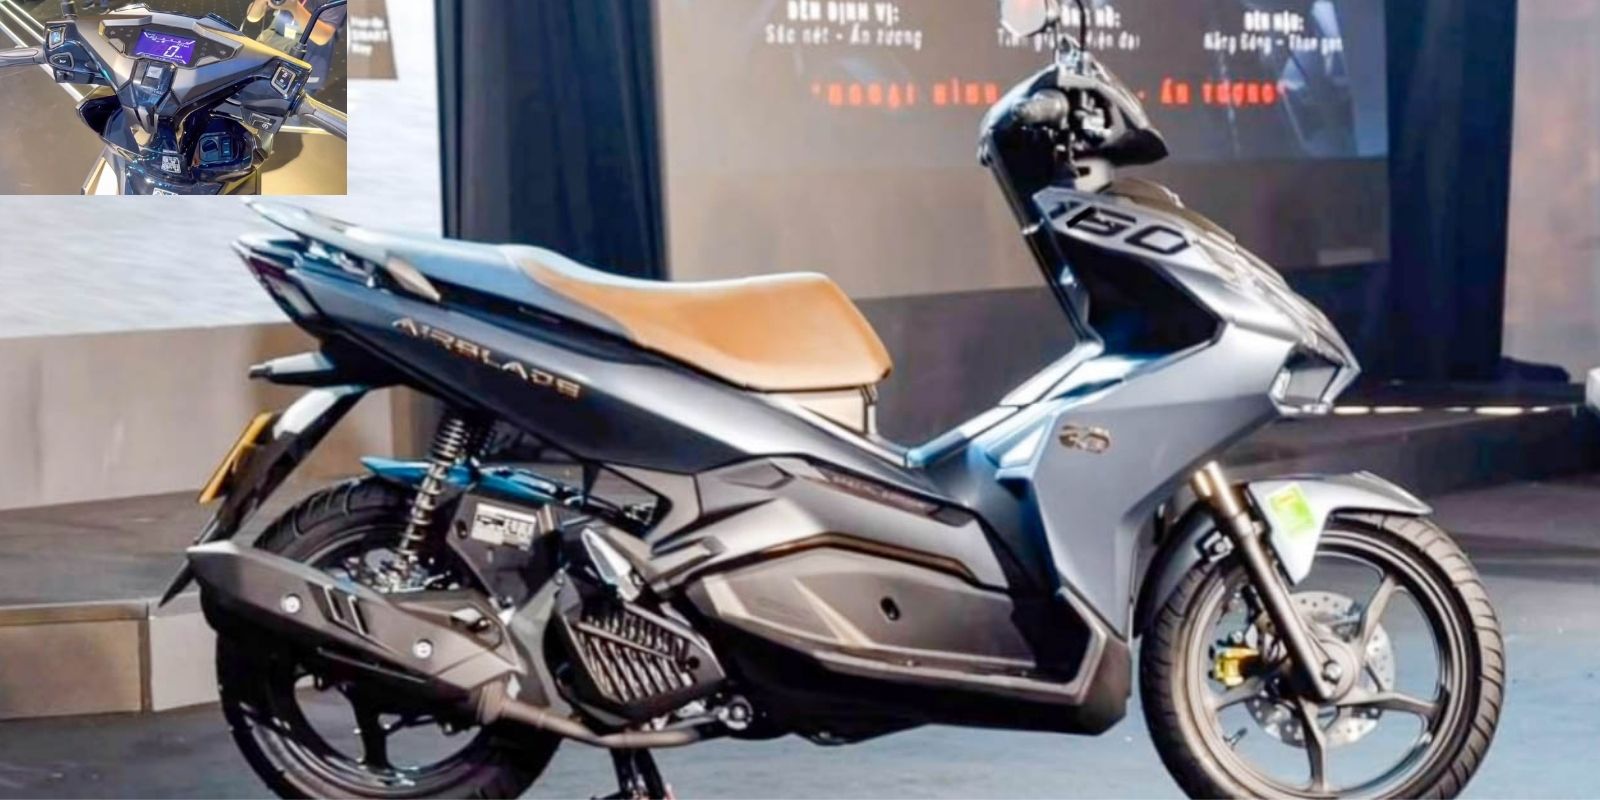 2022 Honda Airblade 160 (Aerox 155 Rival) Launched With Big Updates